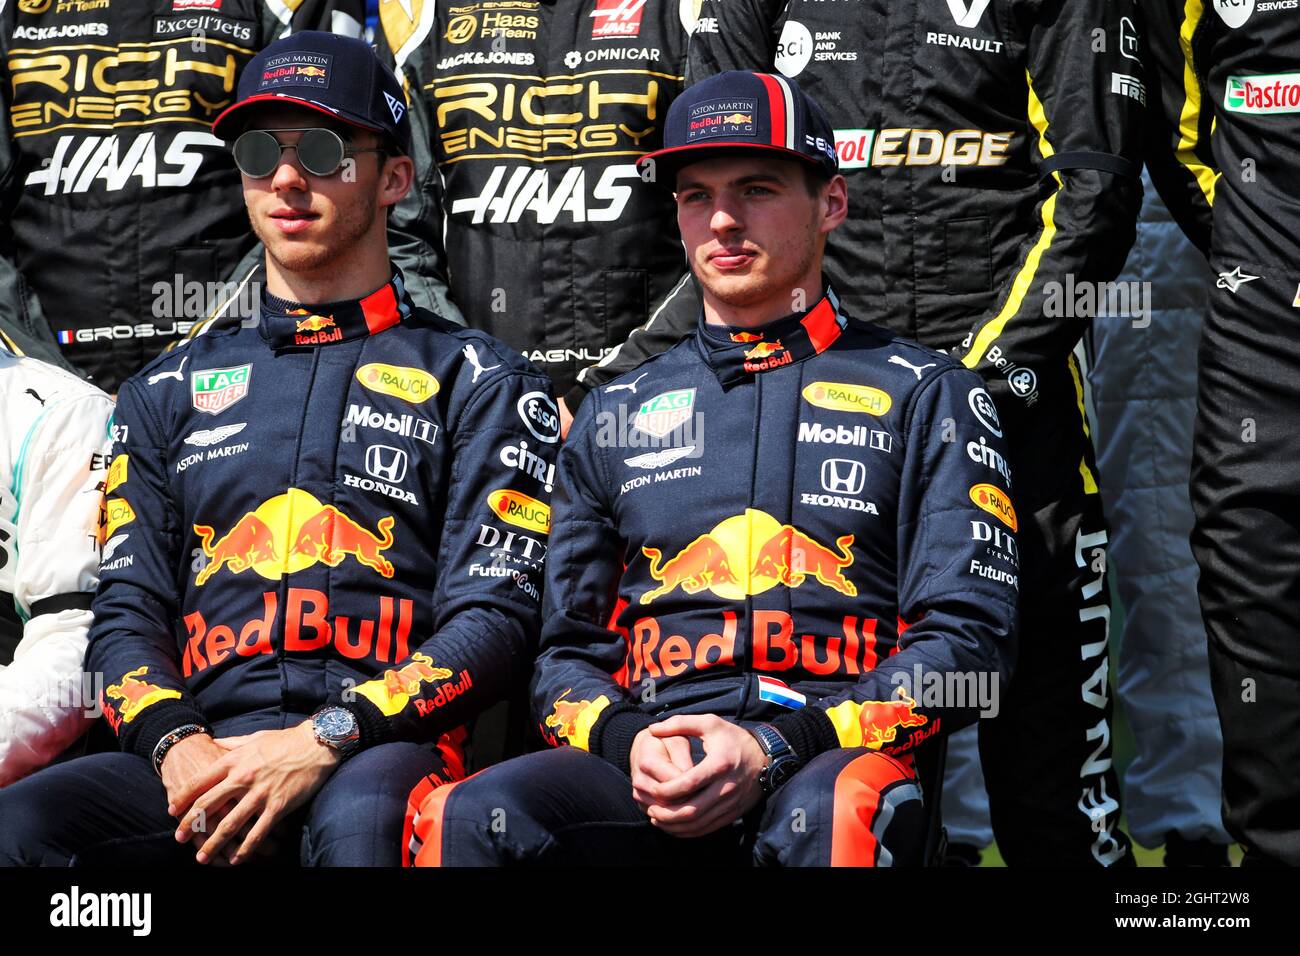 L to R): Pierre Gasly (FRA) Red Bull Racing and Max Verstappen (NLD) Red Bull Racing on the parade. 17.03.2019. 1 World Championship, Rd 1, Grand Prix, Albert Park,